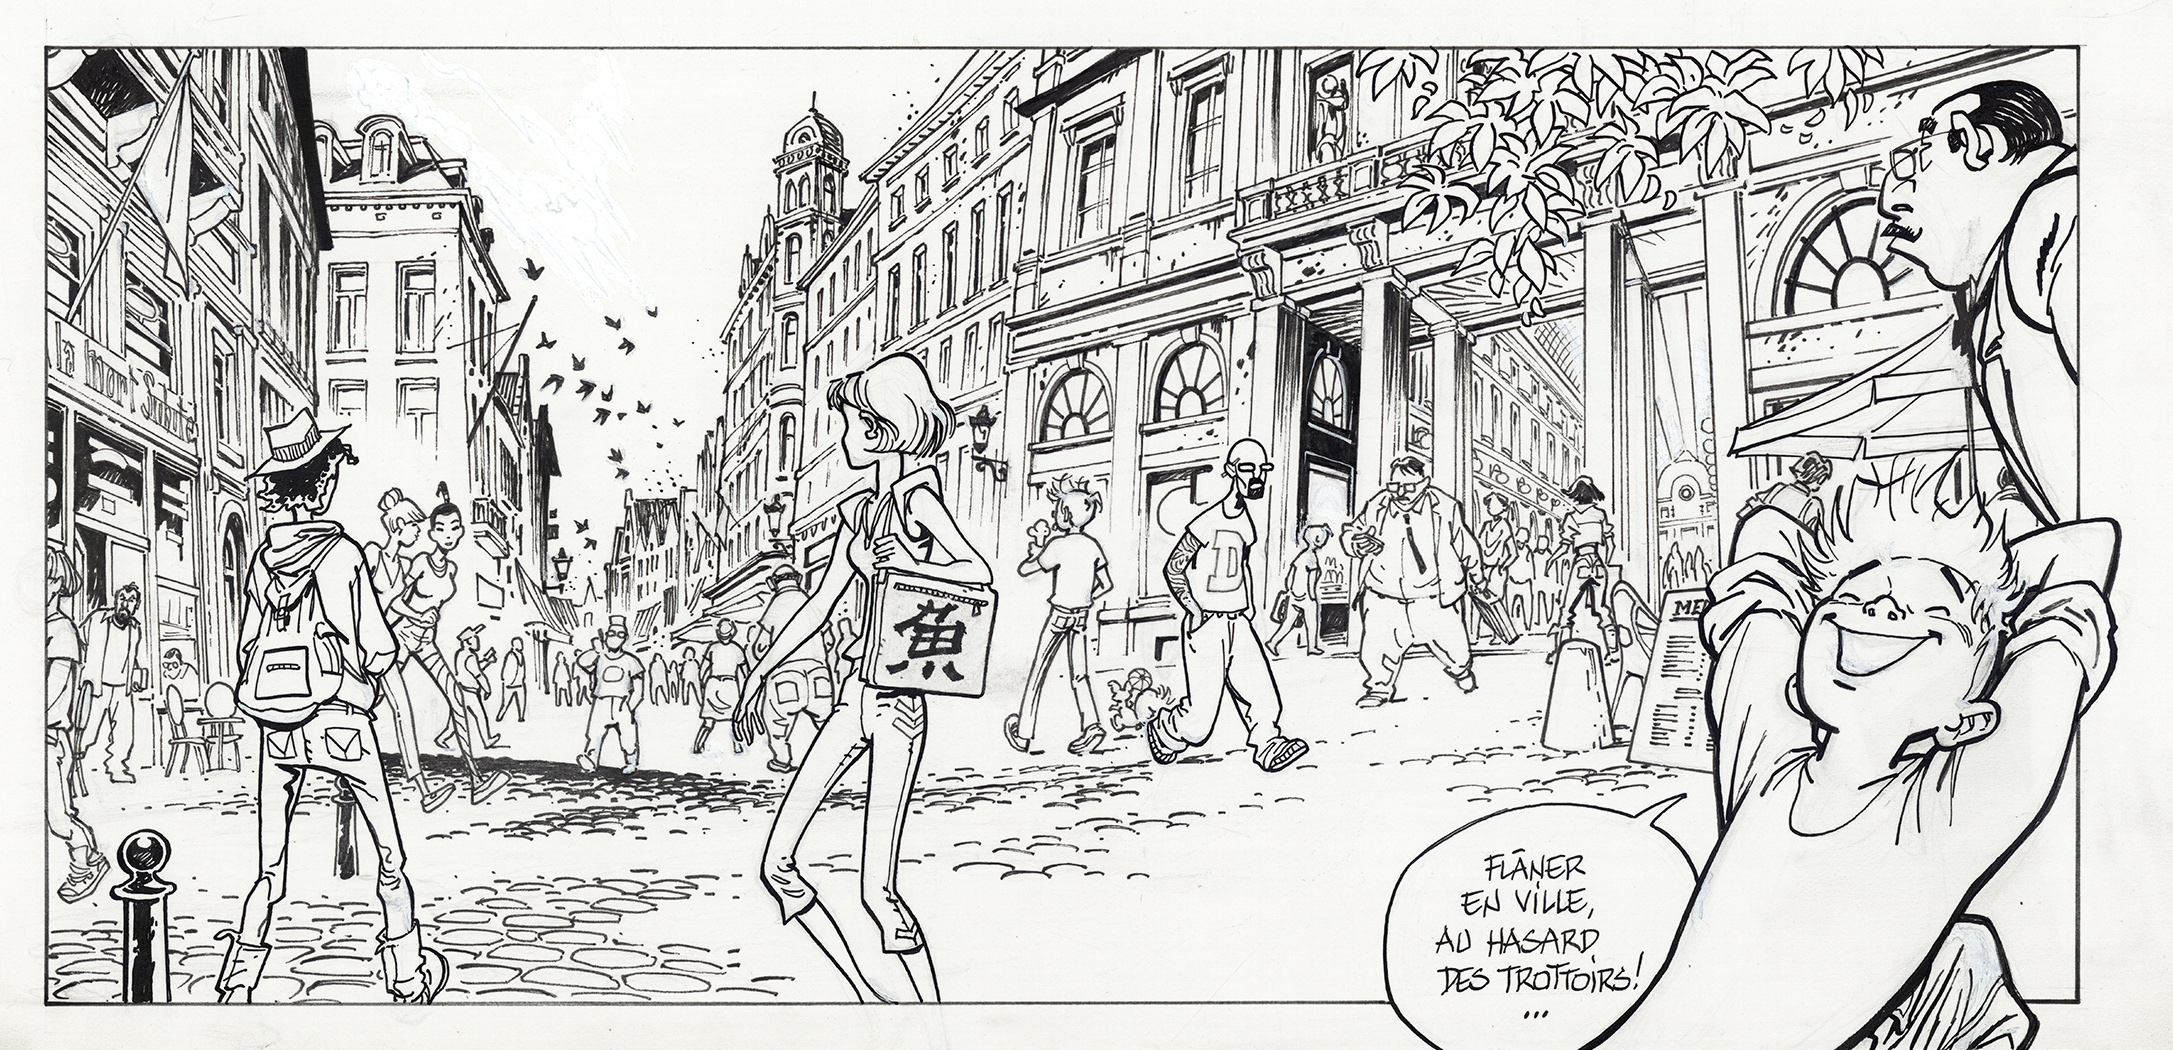 Spirou outside Les Galeries St. Hubert in Brussels, from 'L'Okapi blanc' ("The White Okapi"; ill. Frank Pé & Zidrou; Copyright (c) 2016 Dupuis and the artist; image from comicscenter.net)